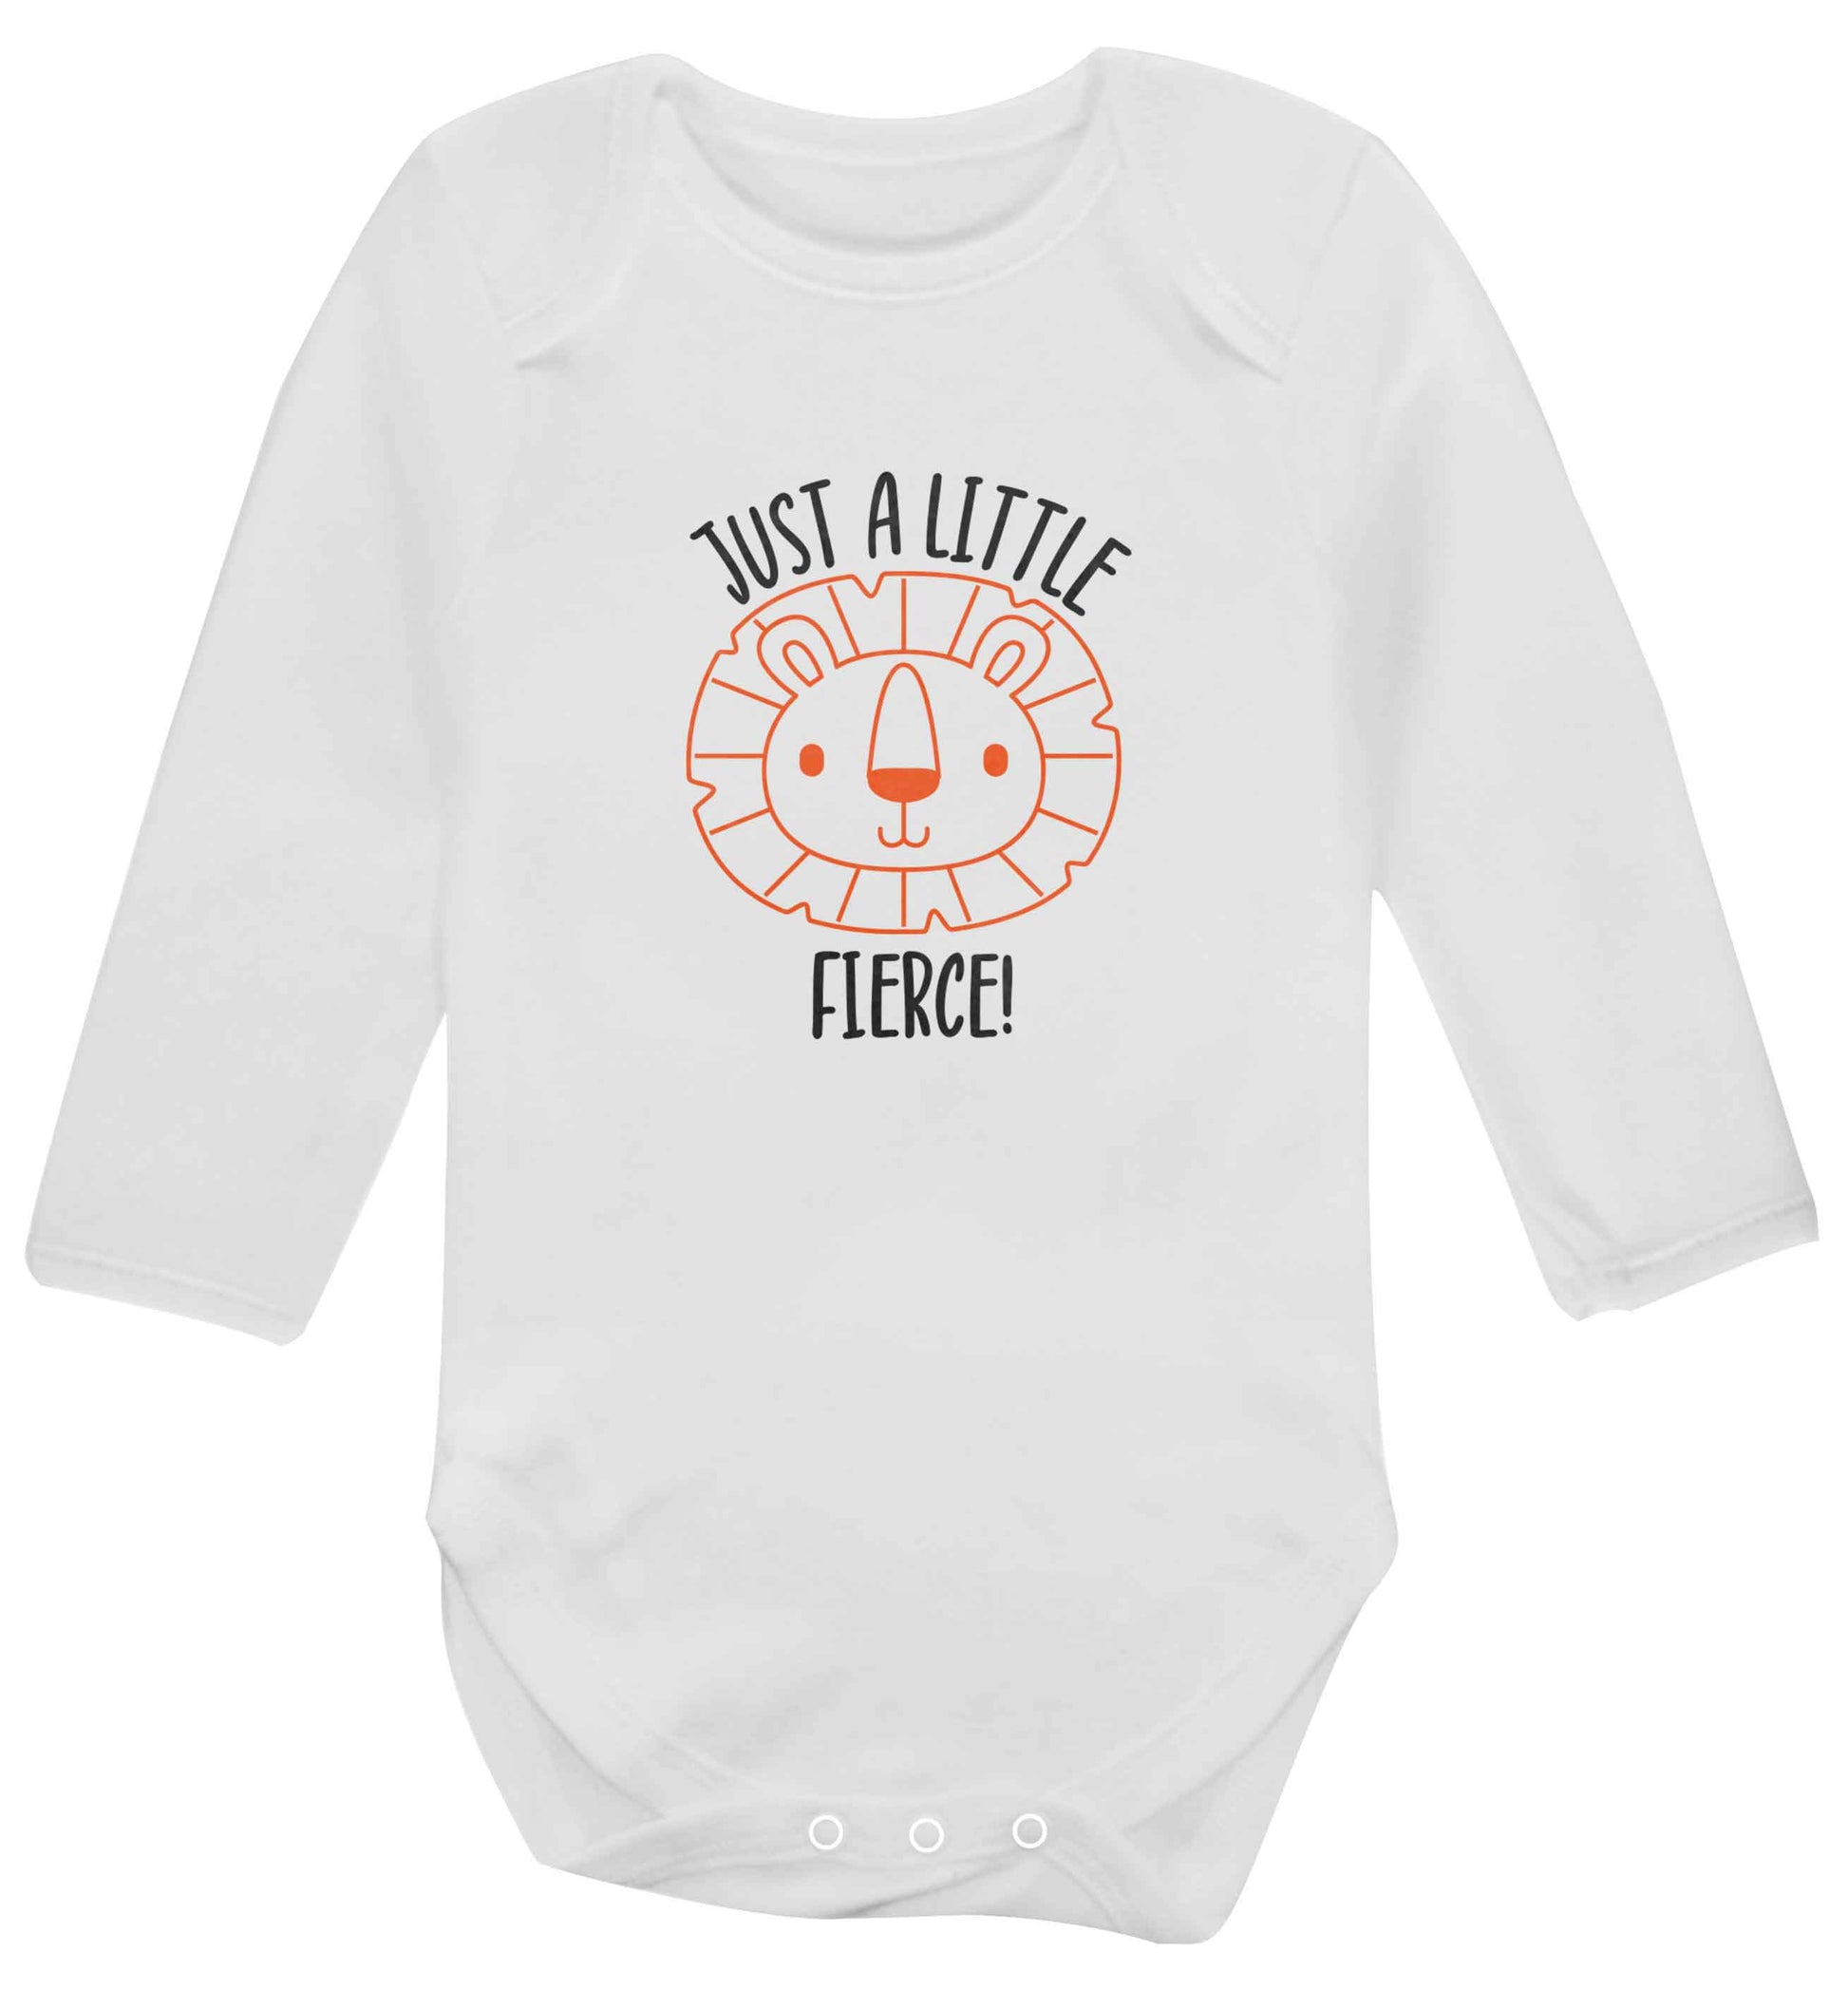 Just a little fierce baby vest long sleeved white 6-12 months